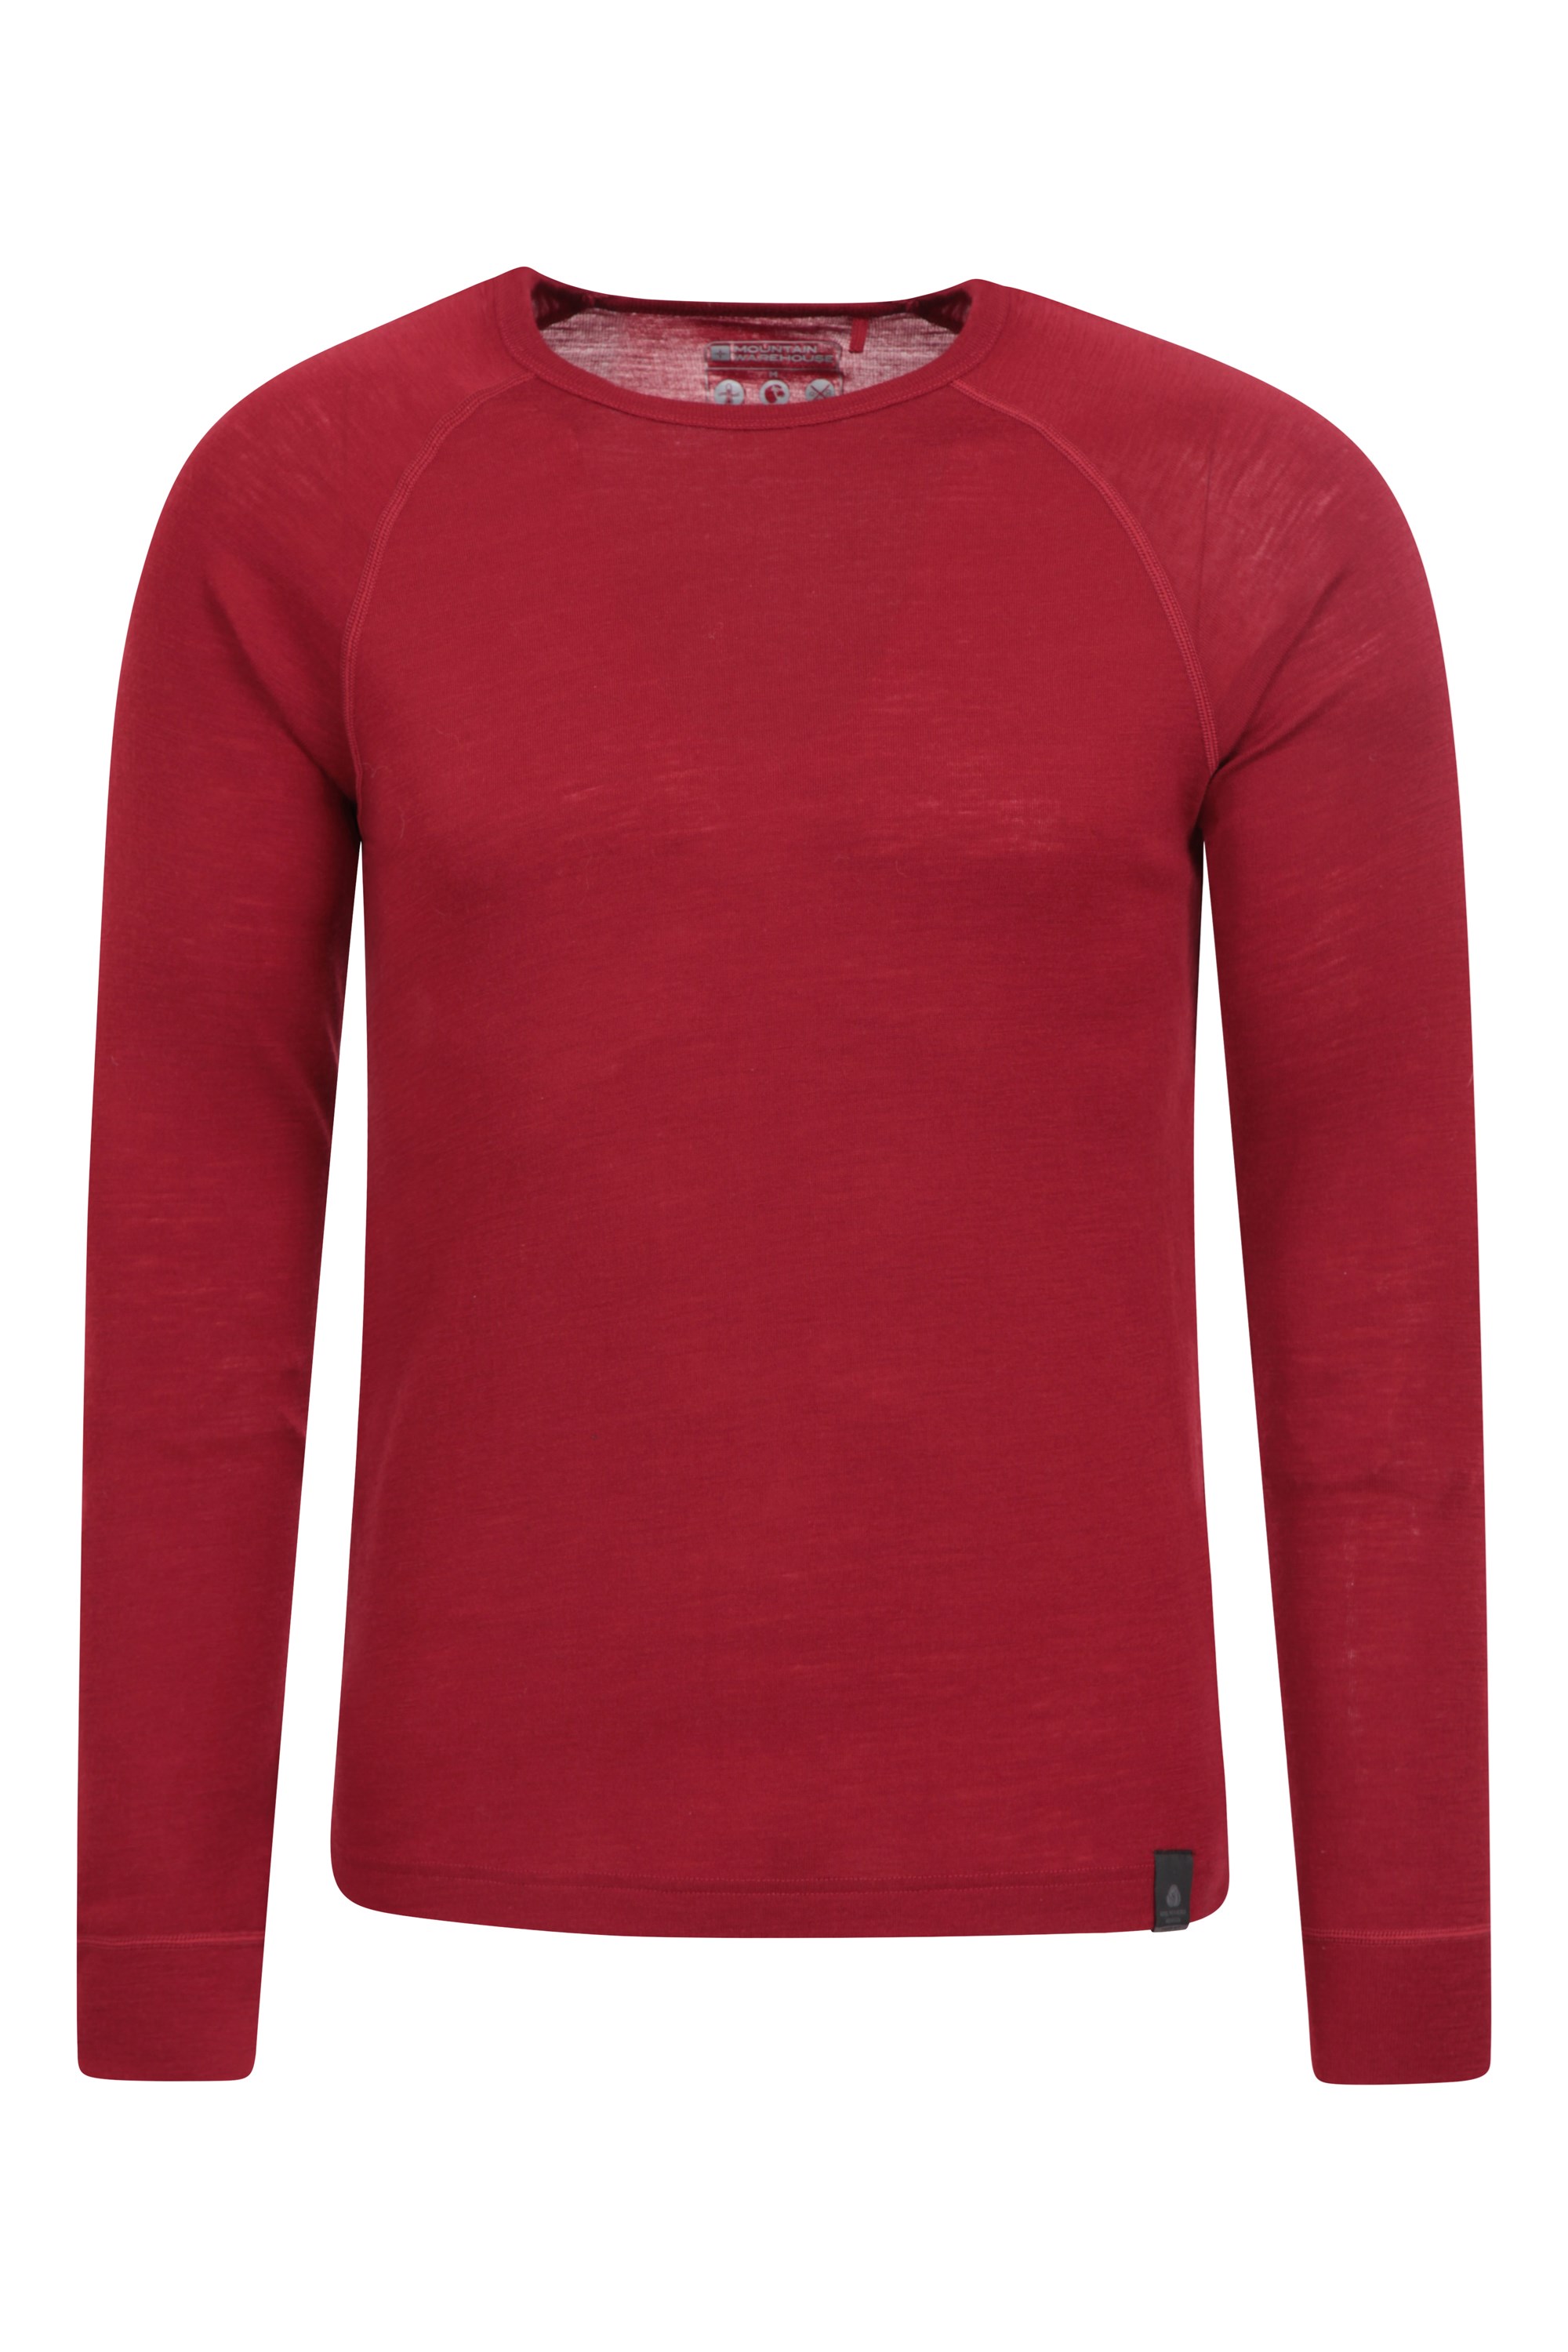 Merino Mens Long Sleeved Round Neck Top - Red